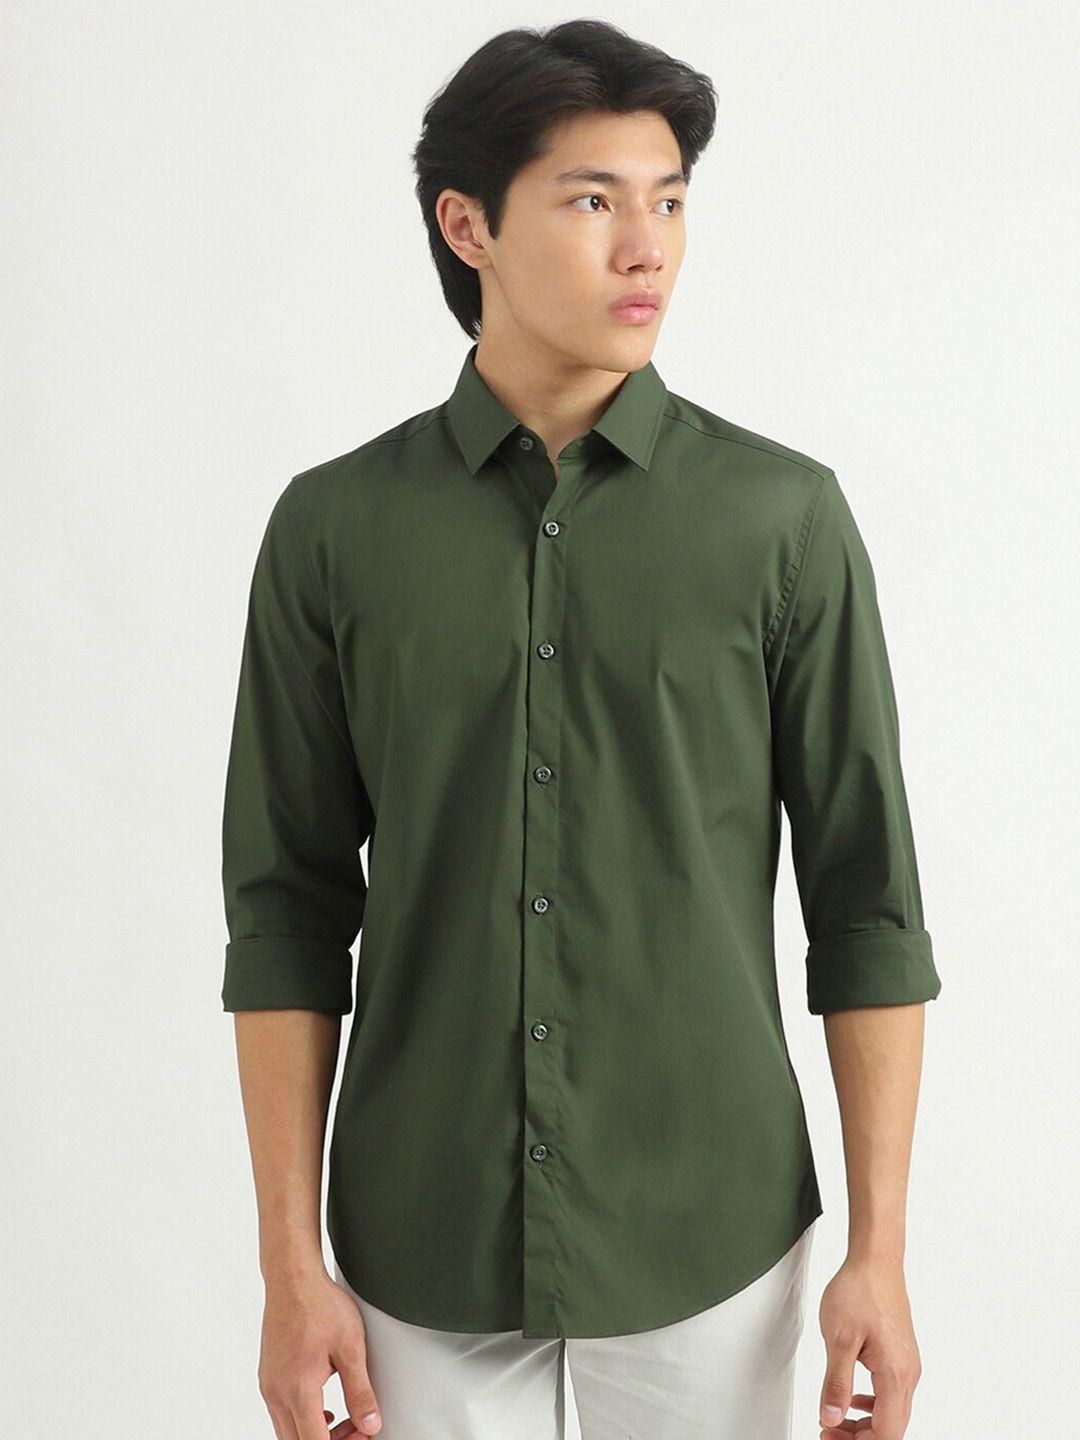 united-colors-of-benetton-men-green-slim-fit-casual-shirt